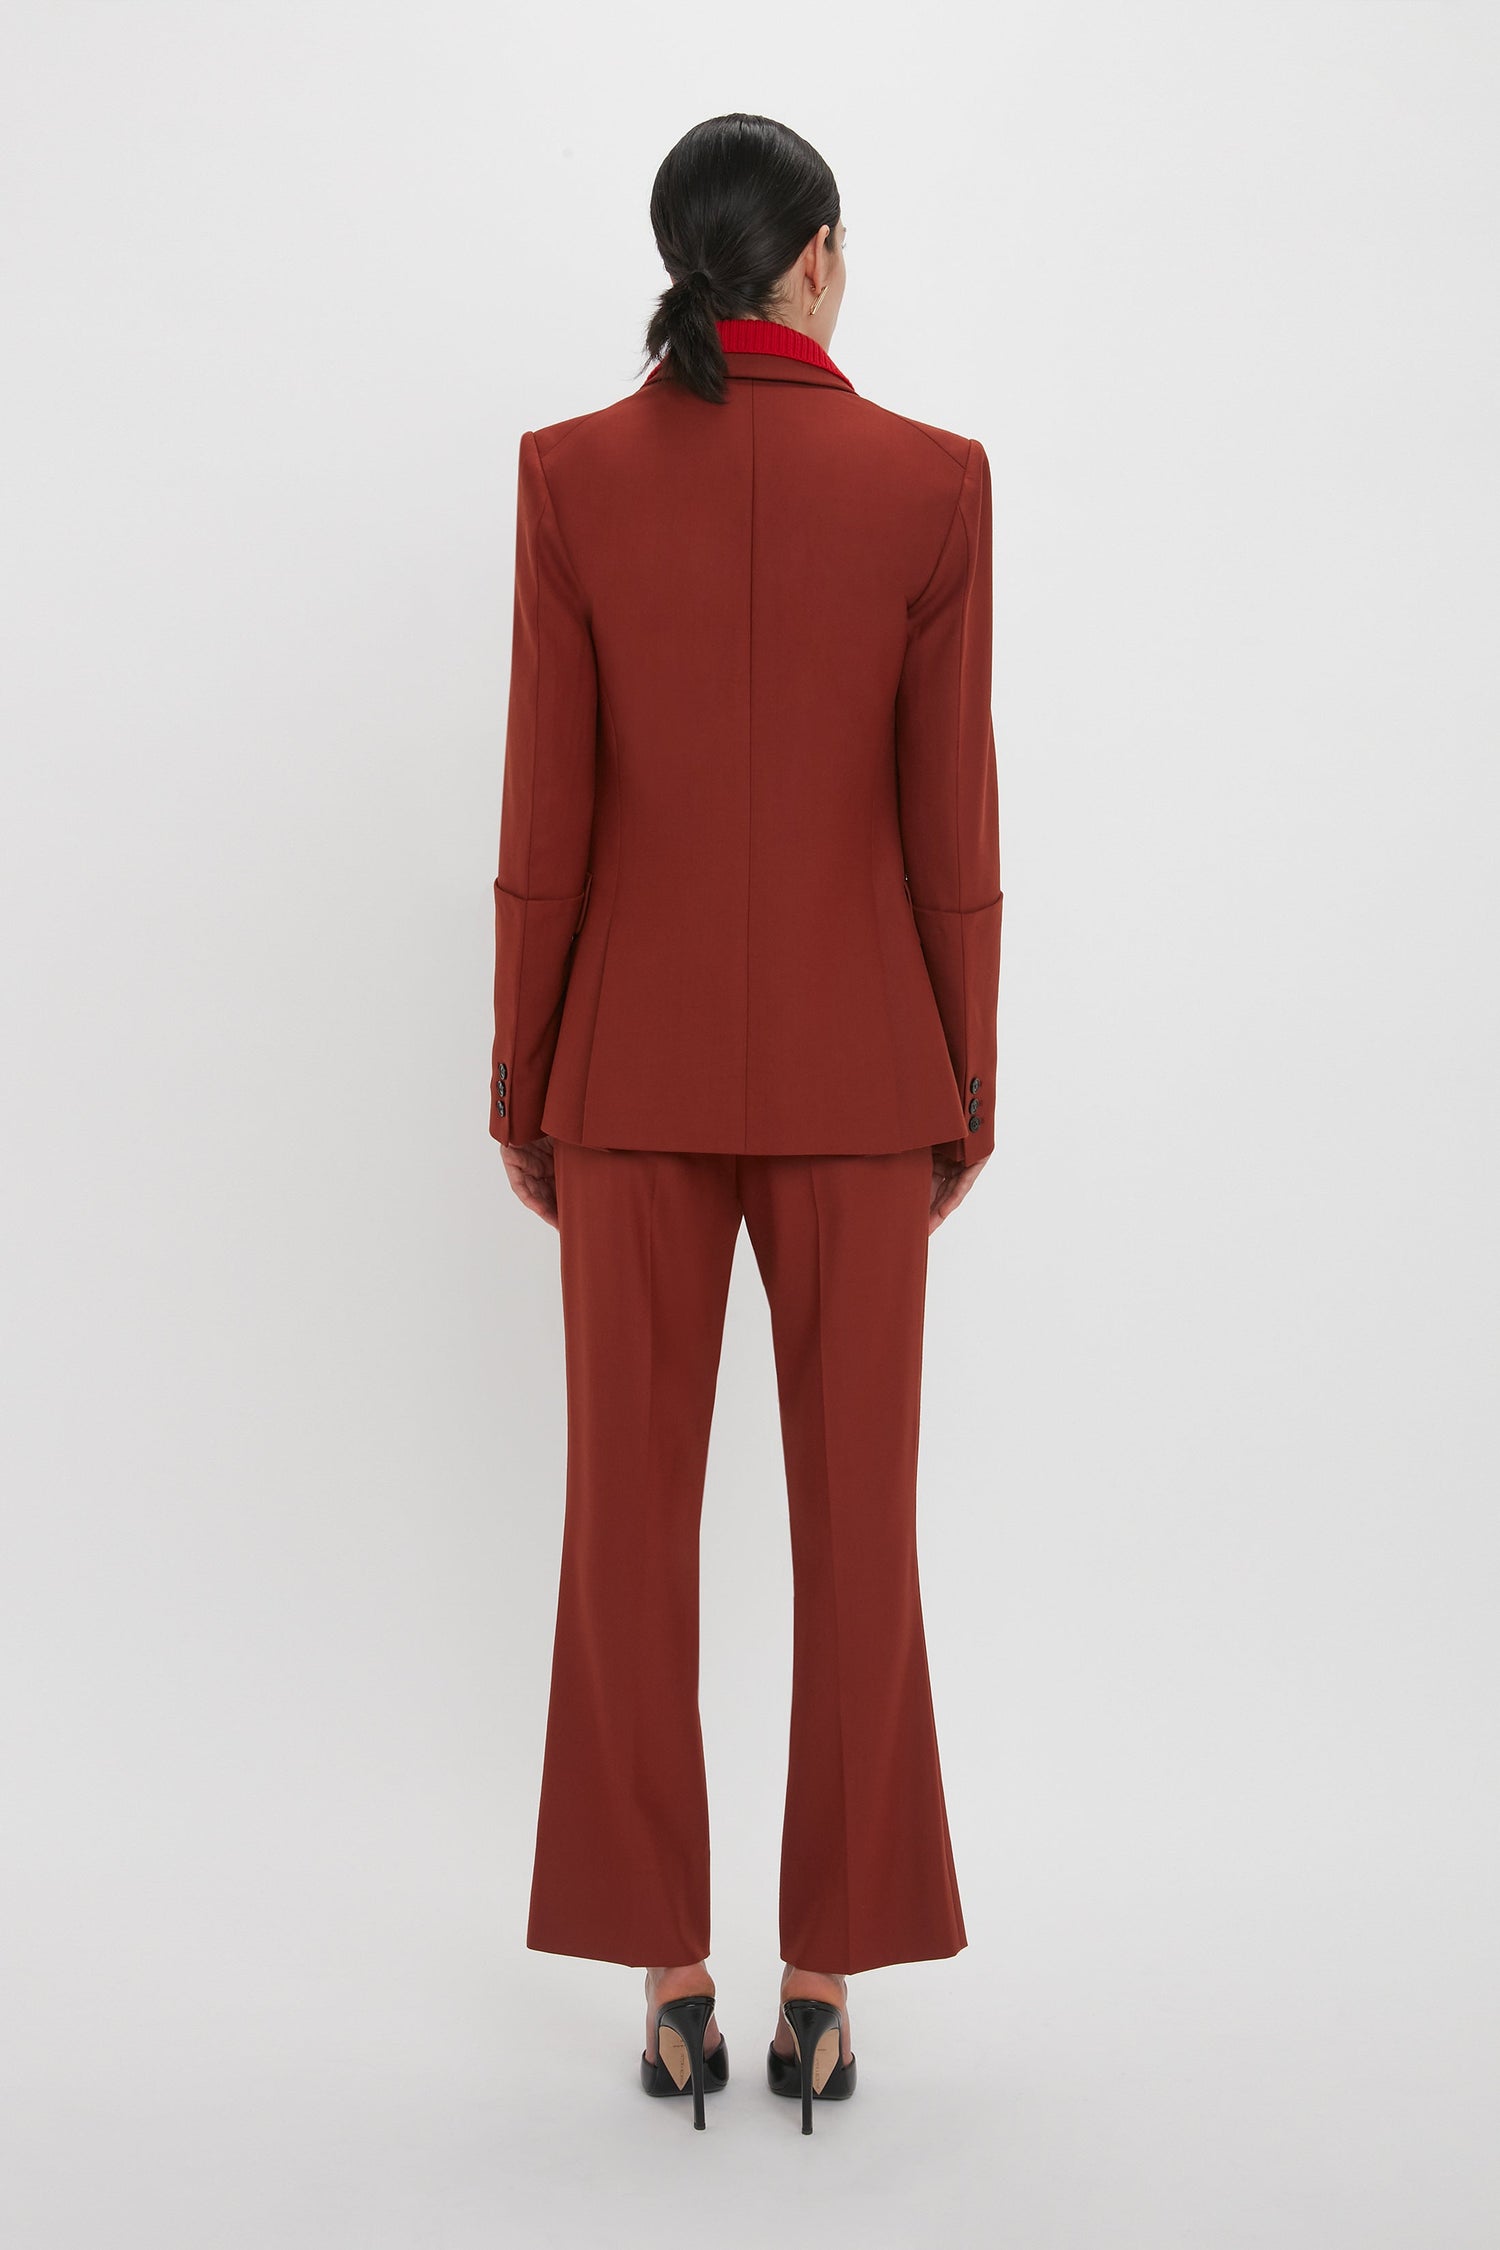 A woman with black hair is shown from the back, wearing a Sleeve Detail Patch Pocket Jacket In Russet by Victoria Beckham with matching trousers and black heels, standing against a plain white background. The contemporary detailing of her outfit adds a sophisticated touch.